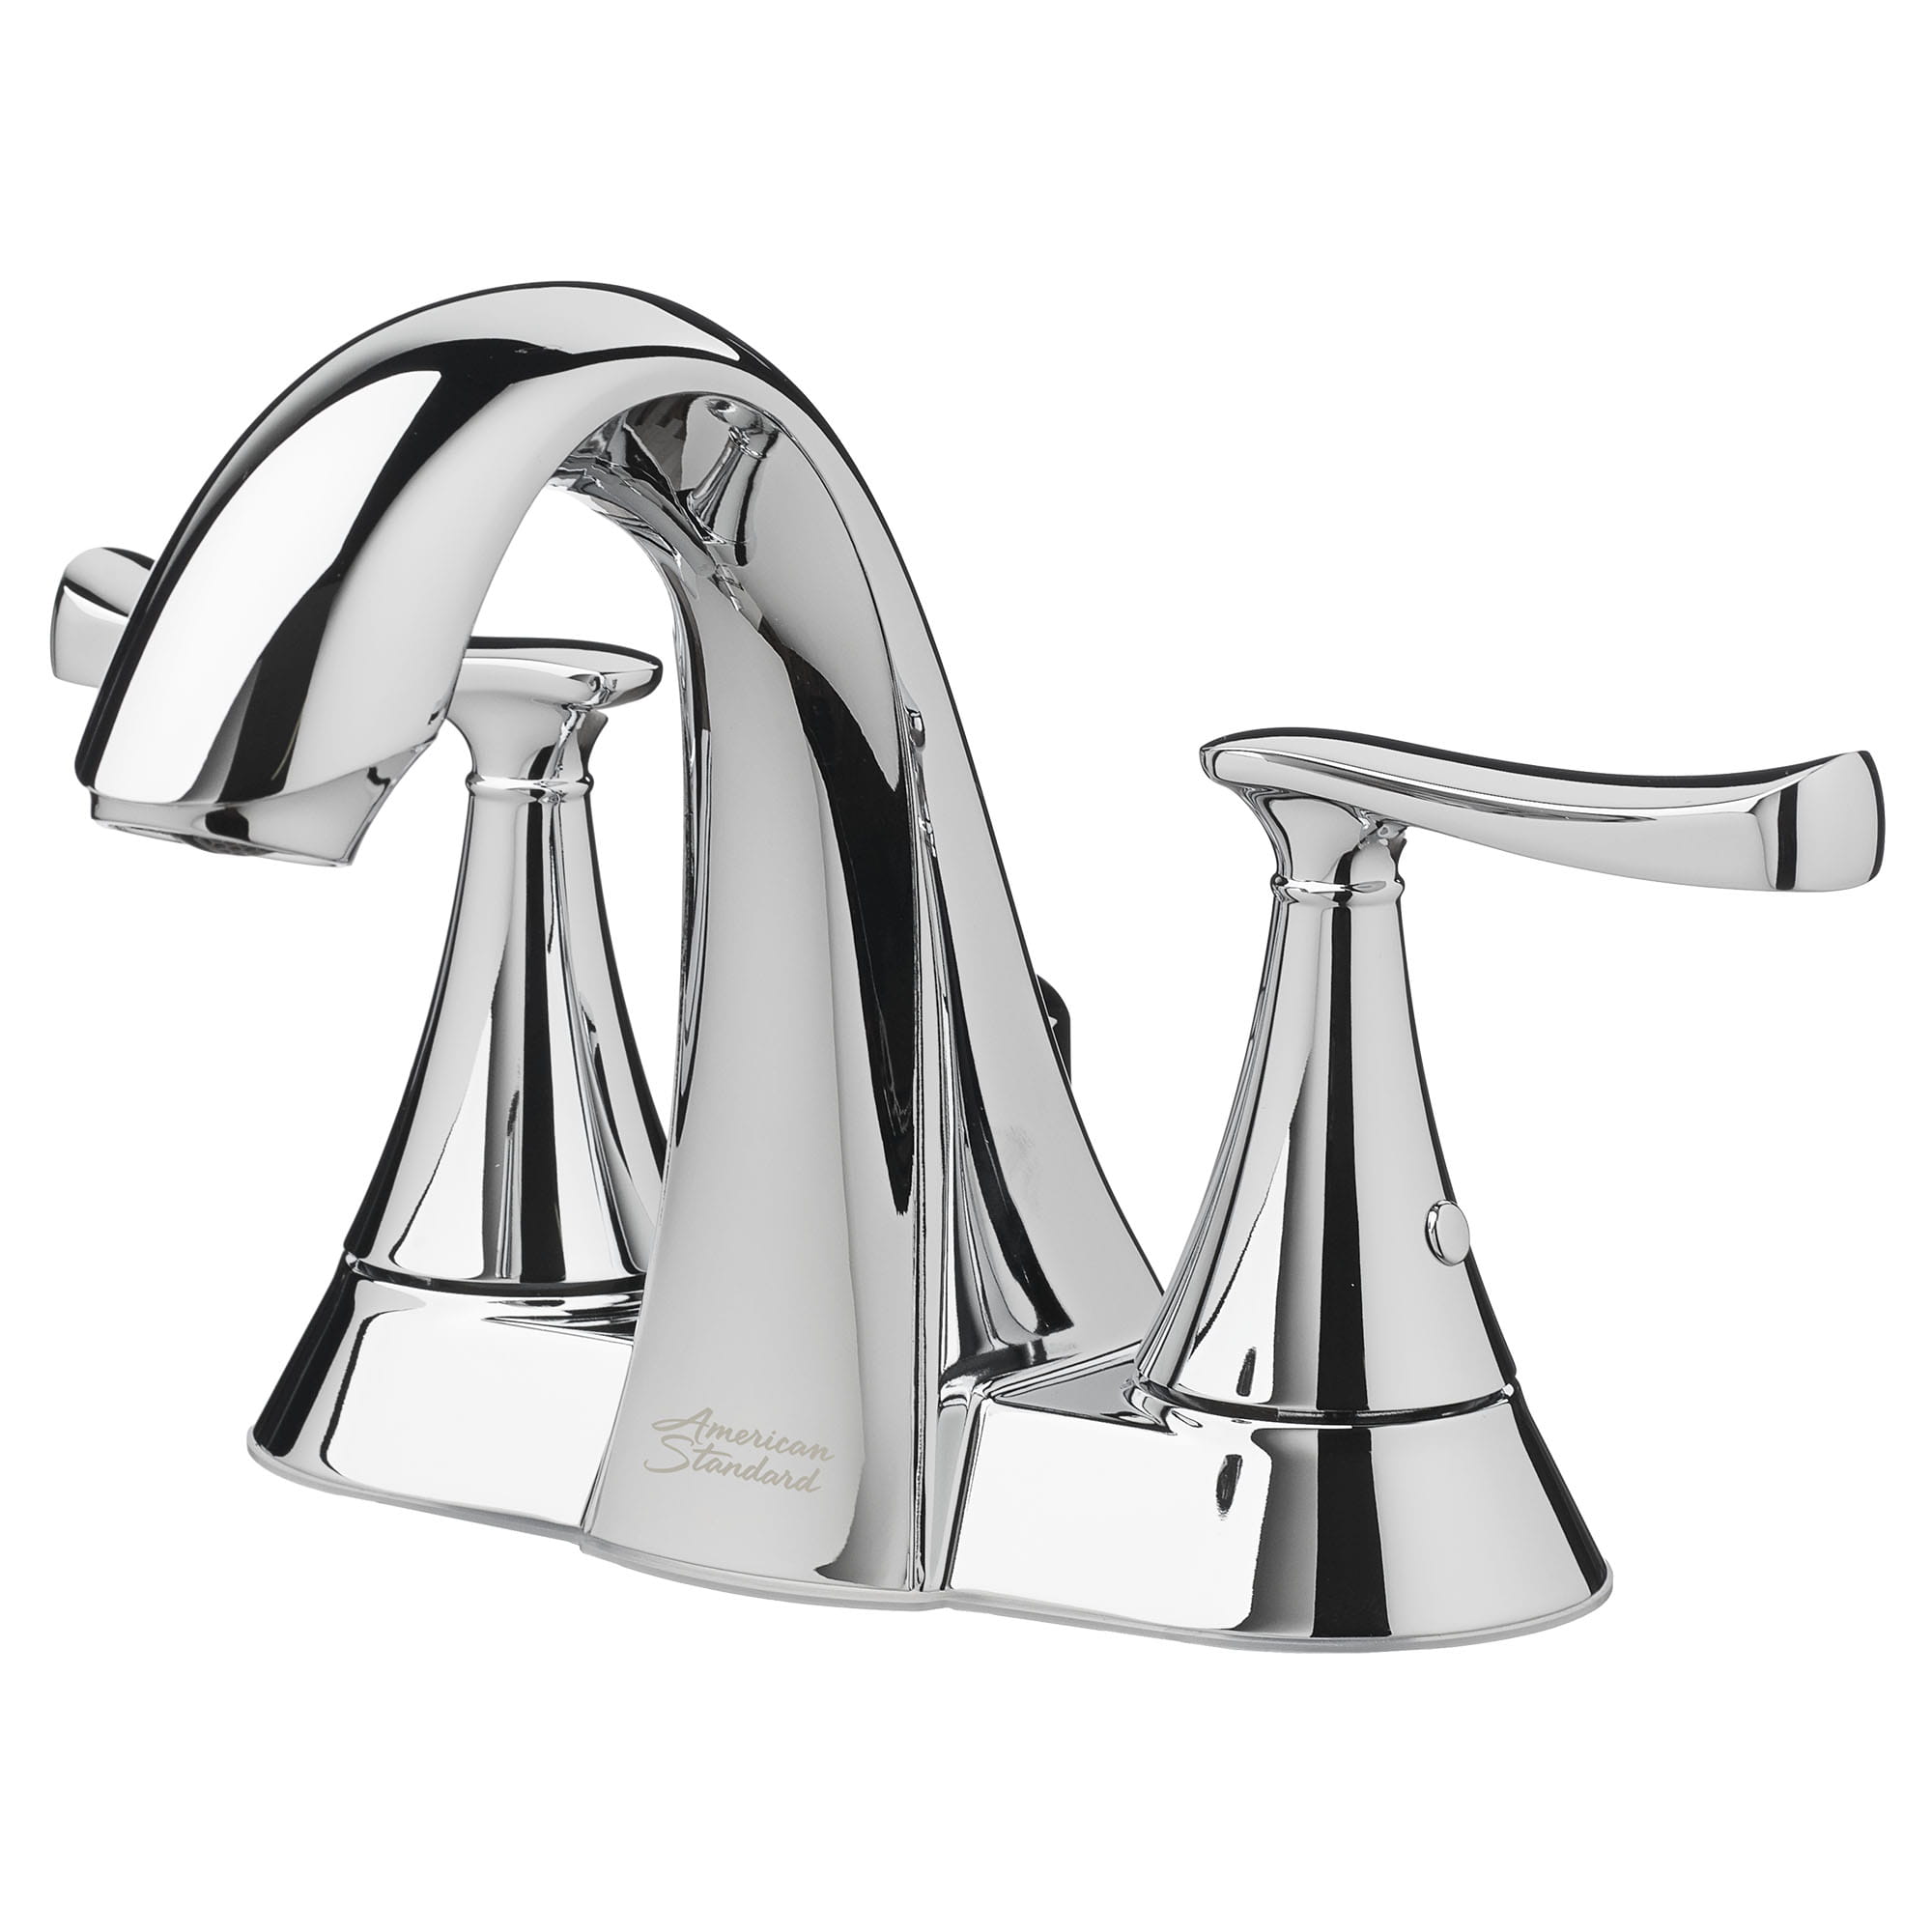 Chatfield® 4-Inch Centerset 2-Handle Bathroom Faucet 1.2 gpm/4.5 L/min With Lever Handles